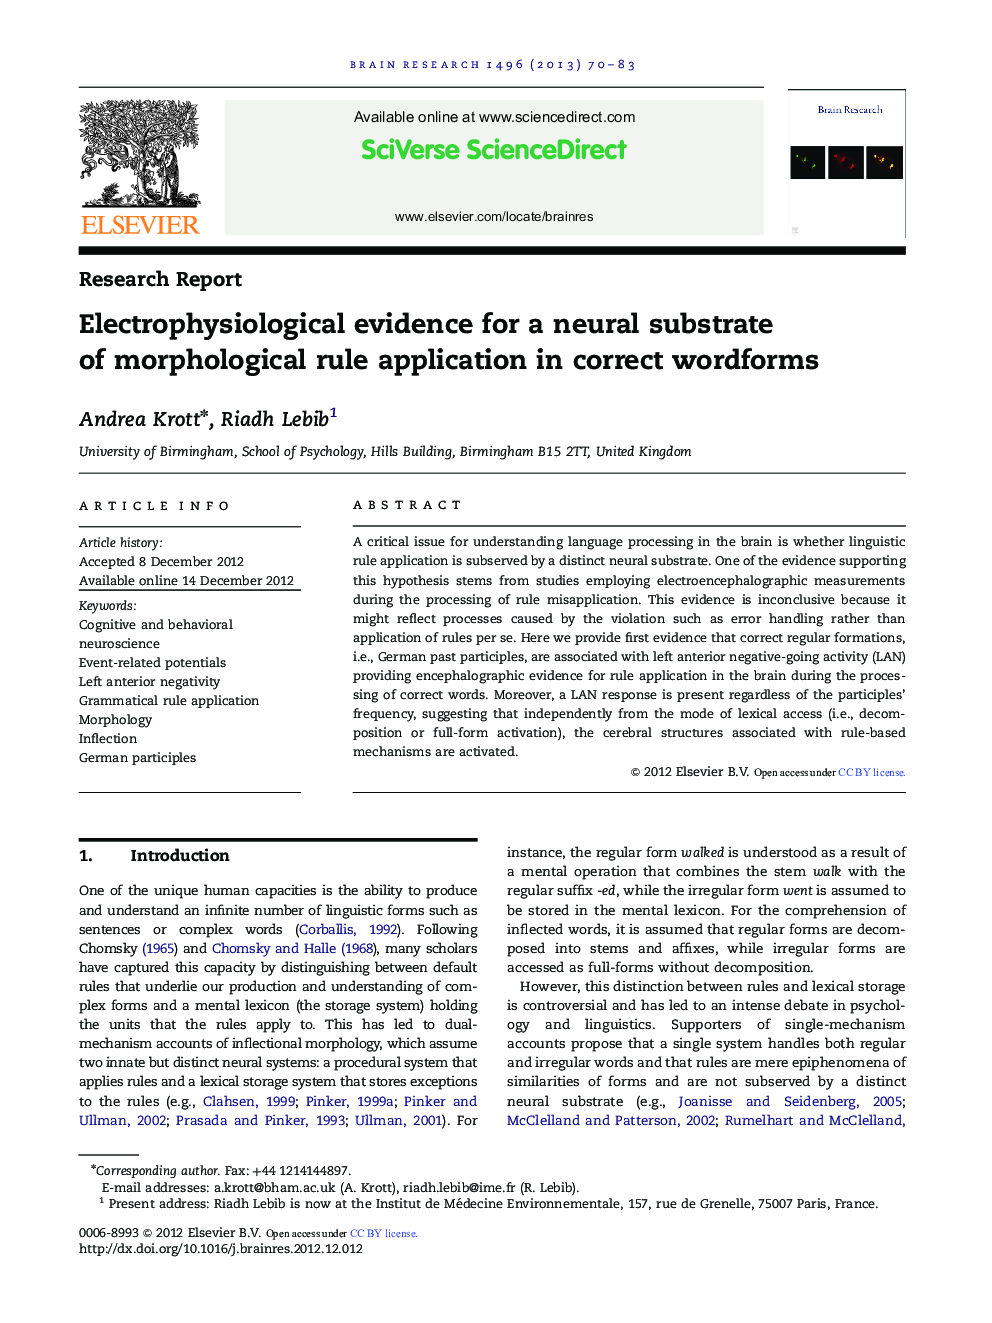 Research ReportElectrophysiological evidence for a neural substrate of morphological rule application in correct wordforms